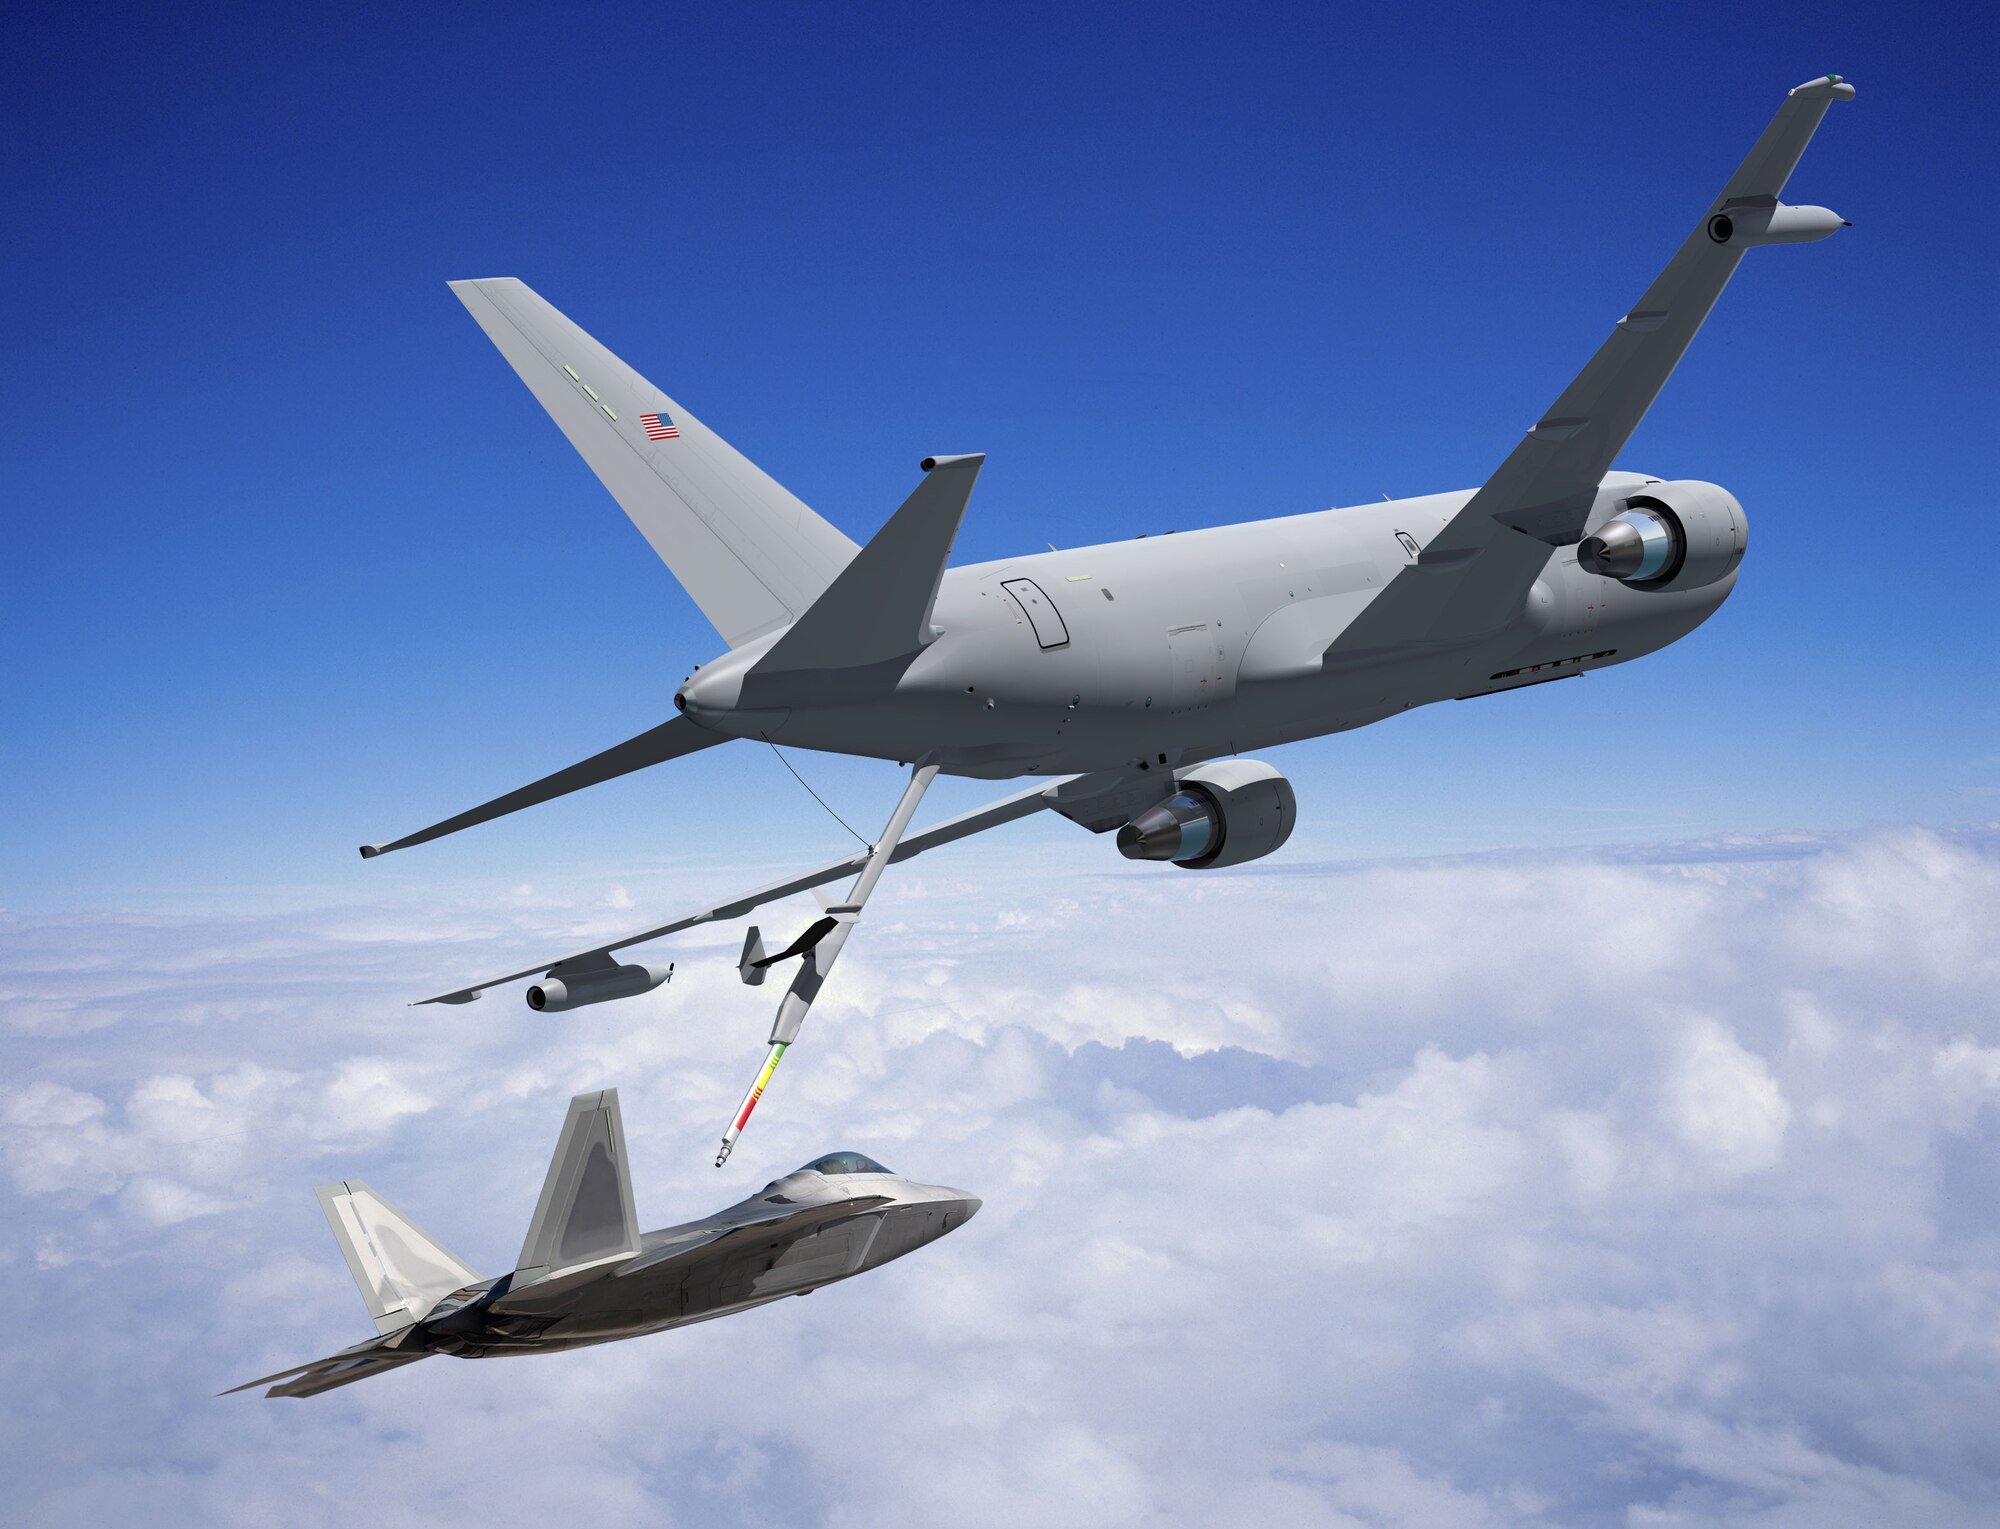 A KC-46 conducts in-flight refueling on a F-22 fighter in this illustration. The first KC-46 is expected to fly in 2015. (Air Force illustration)
